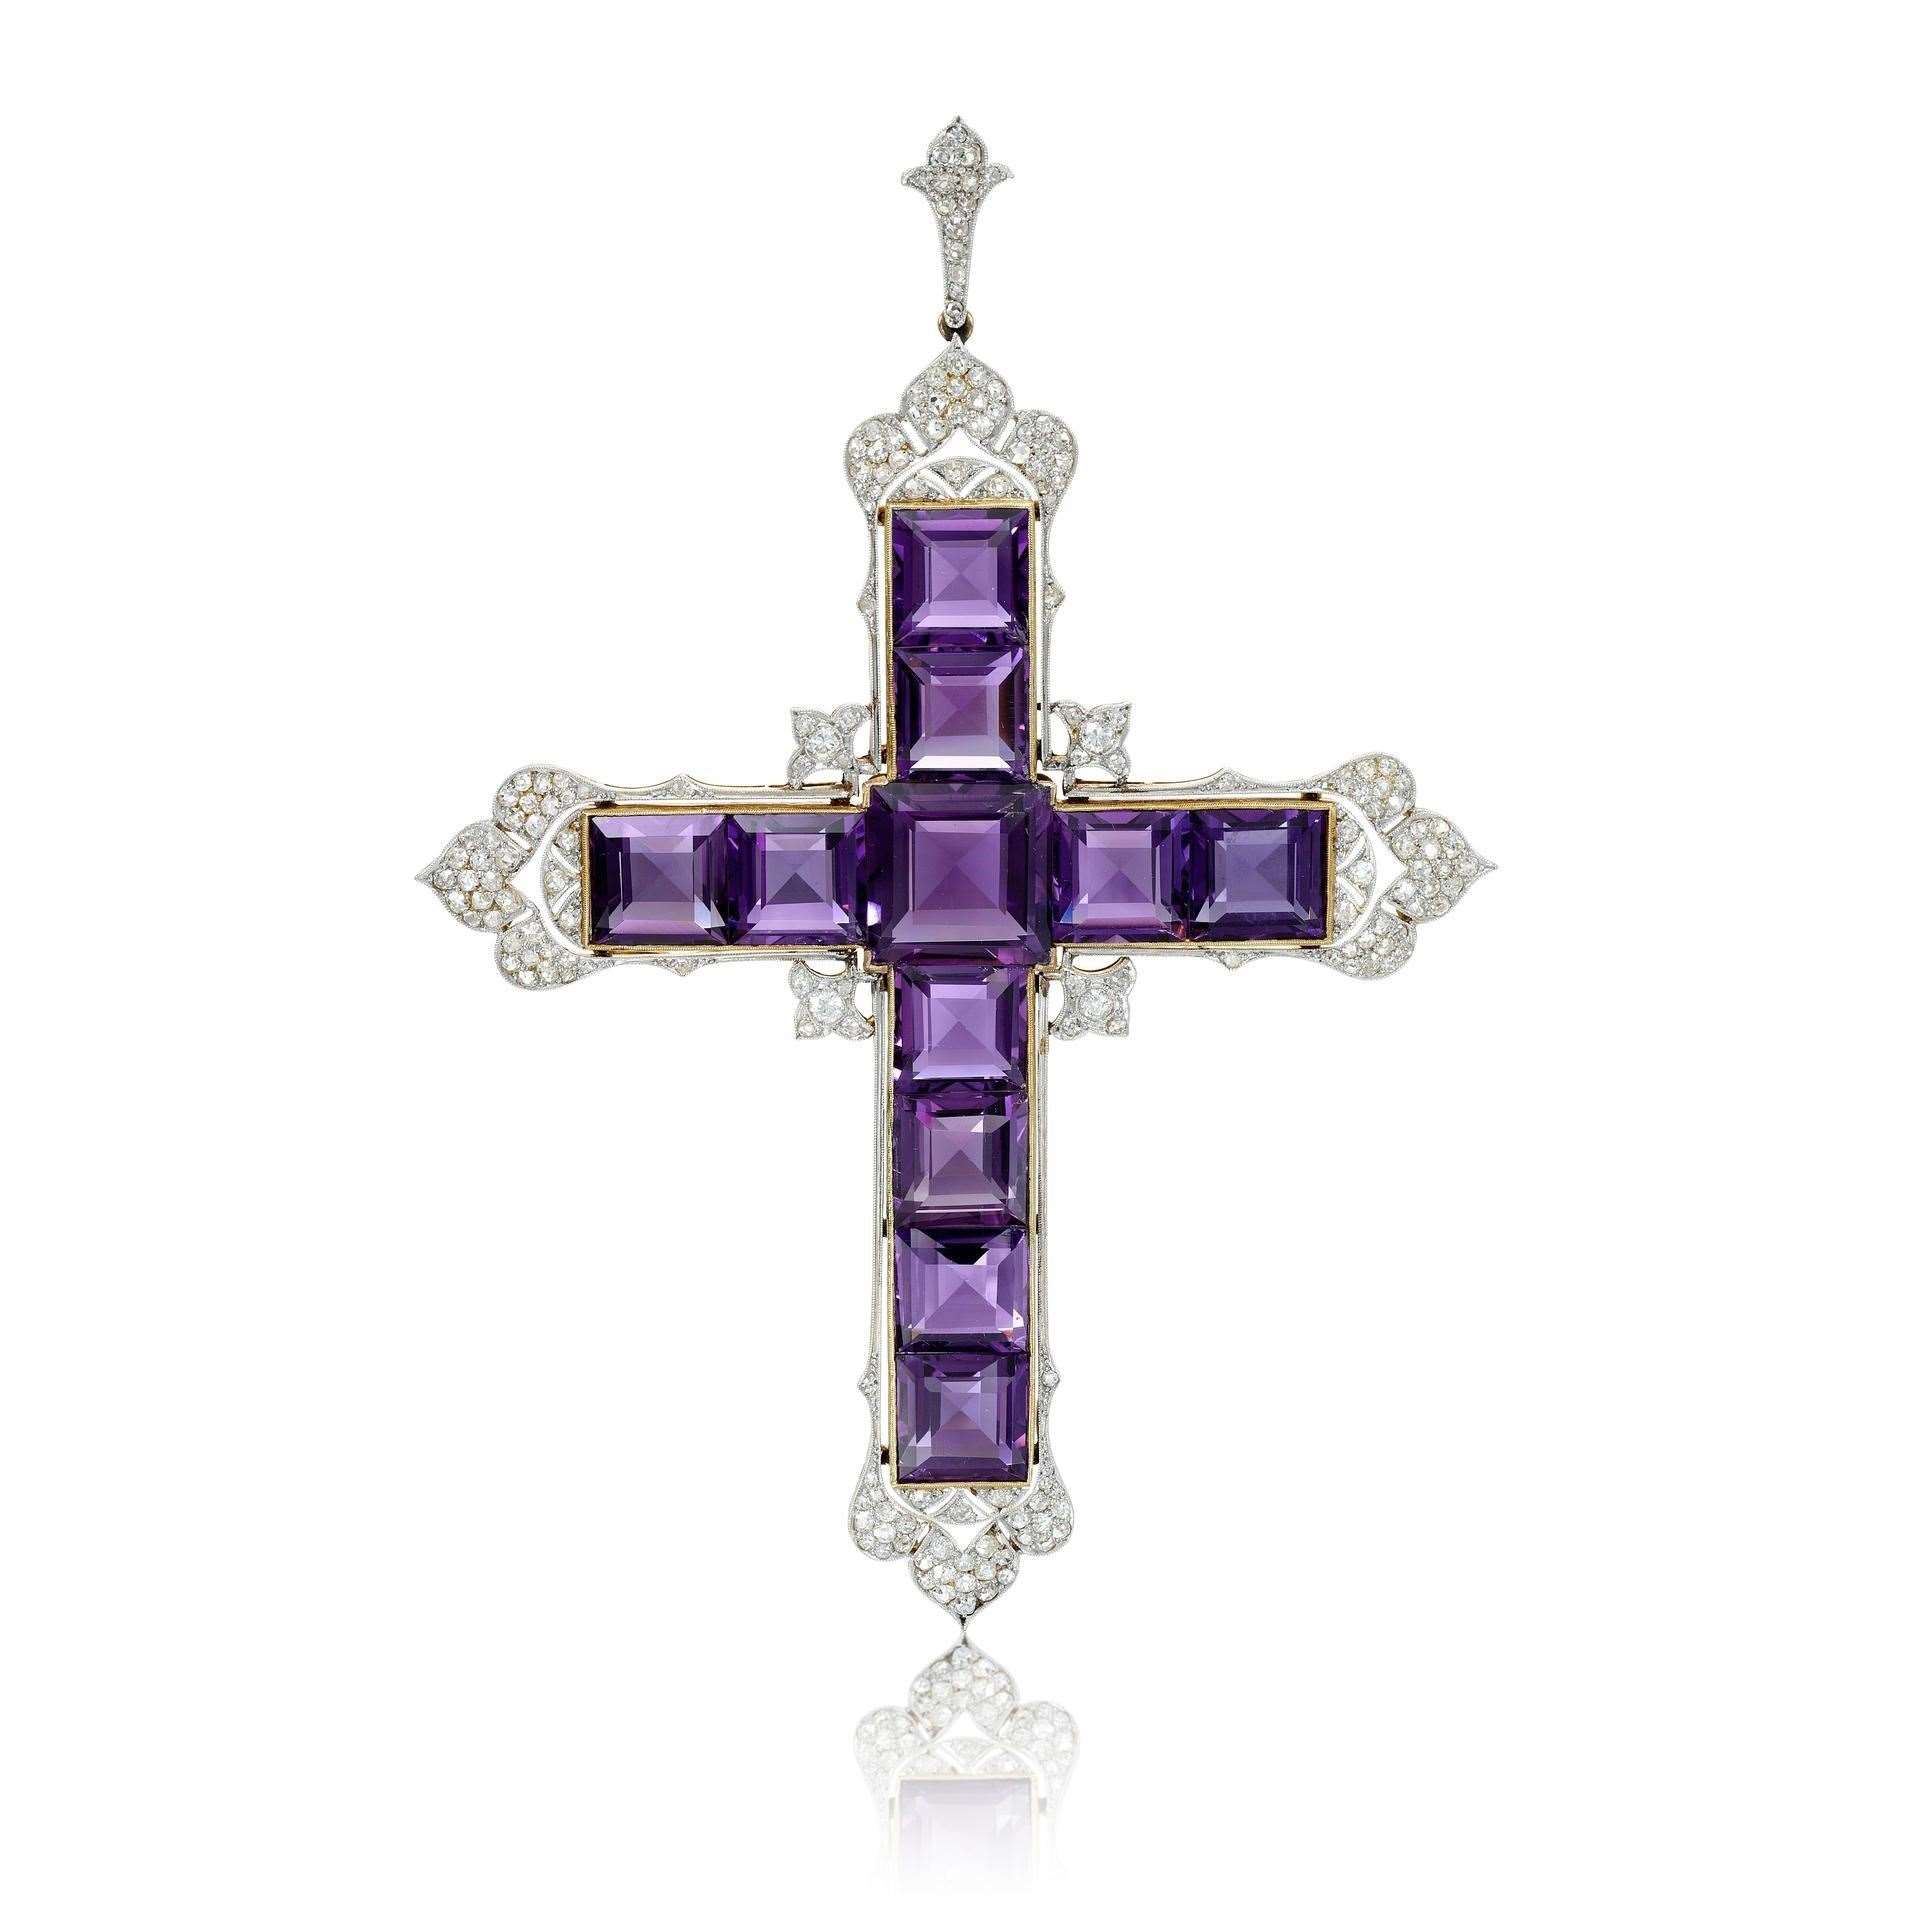 The Attallah Cross, worn on several occasions by Diana (Sotheby’s/PA)